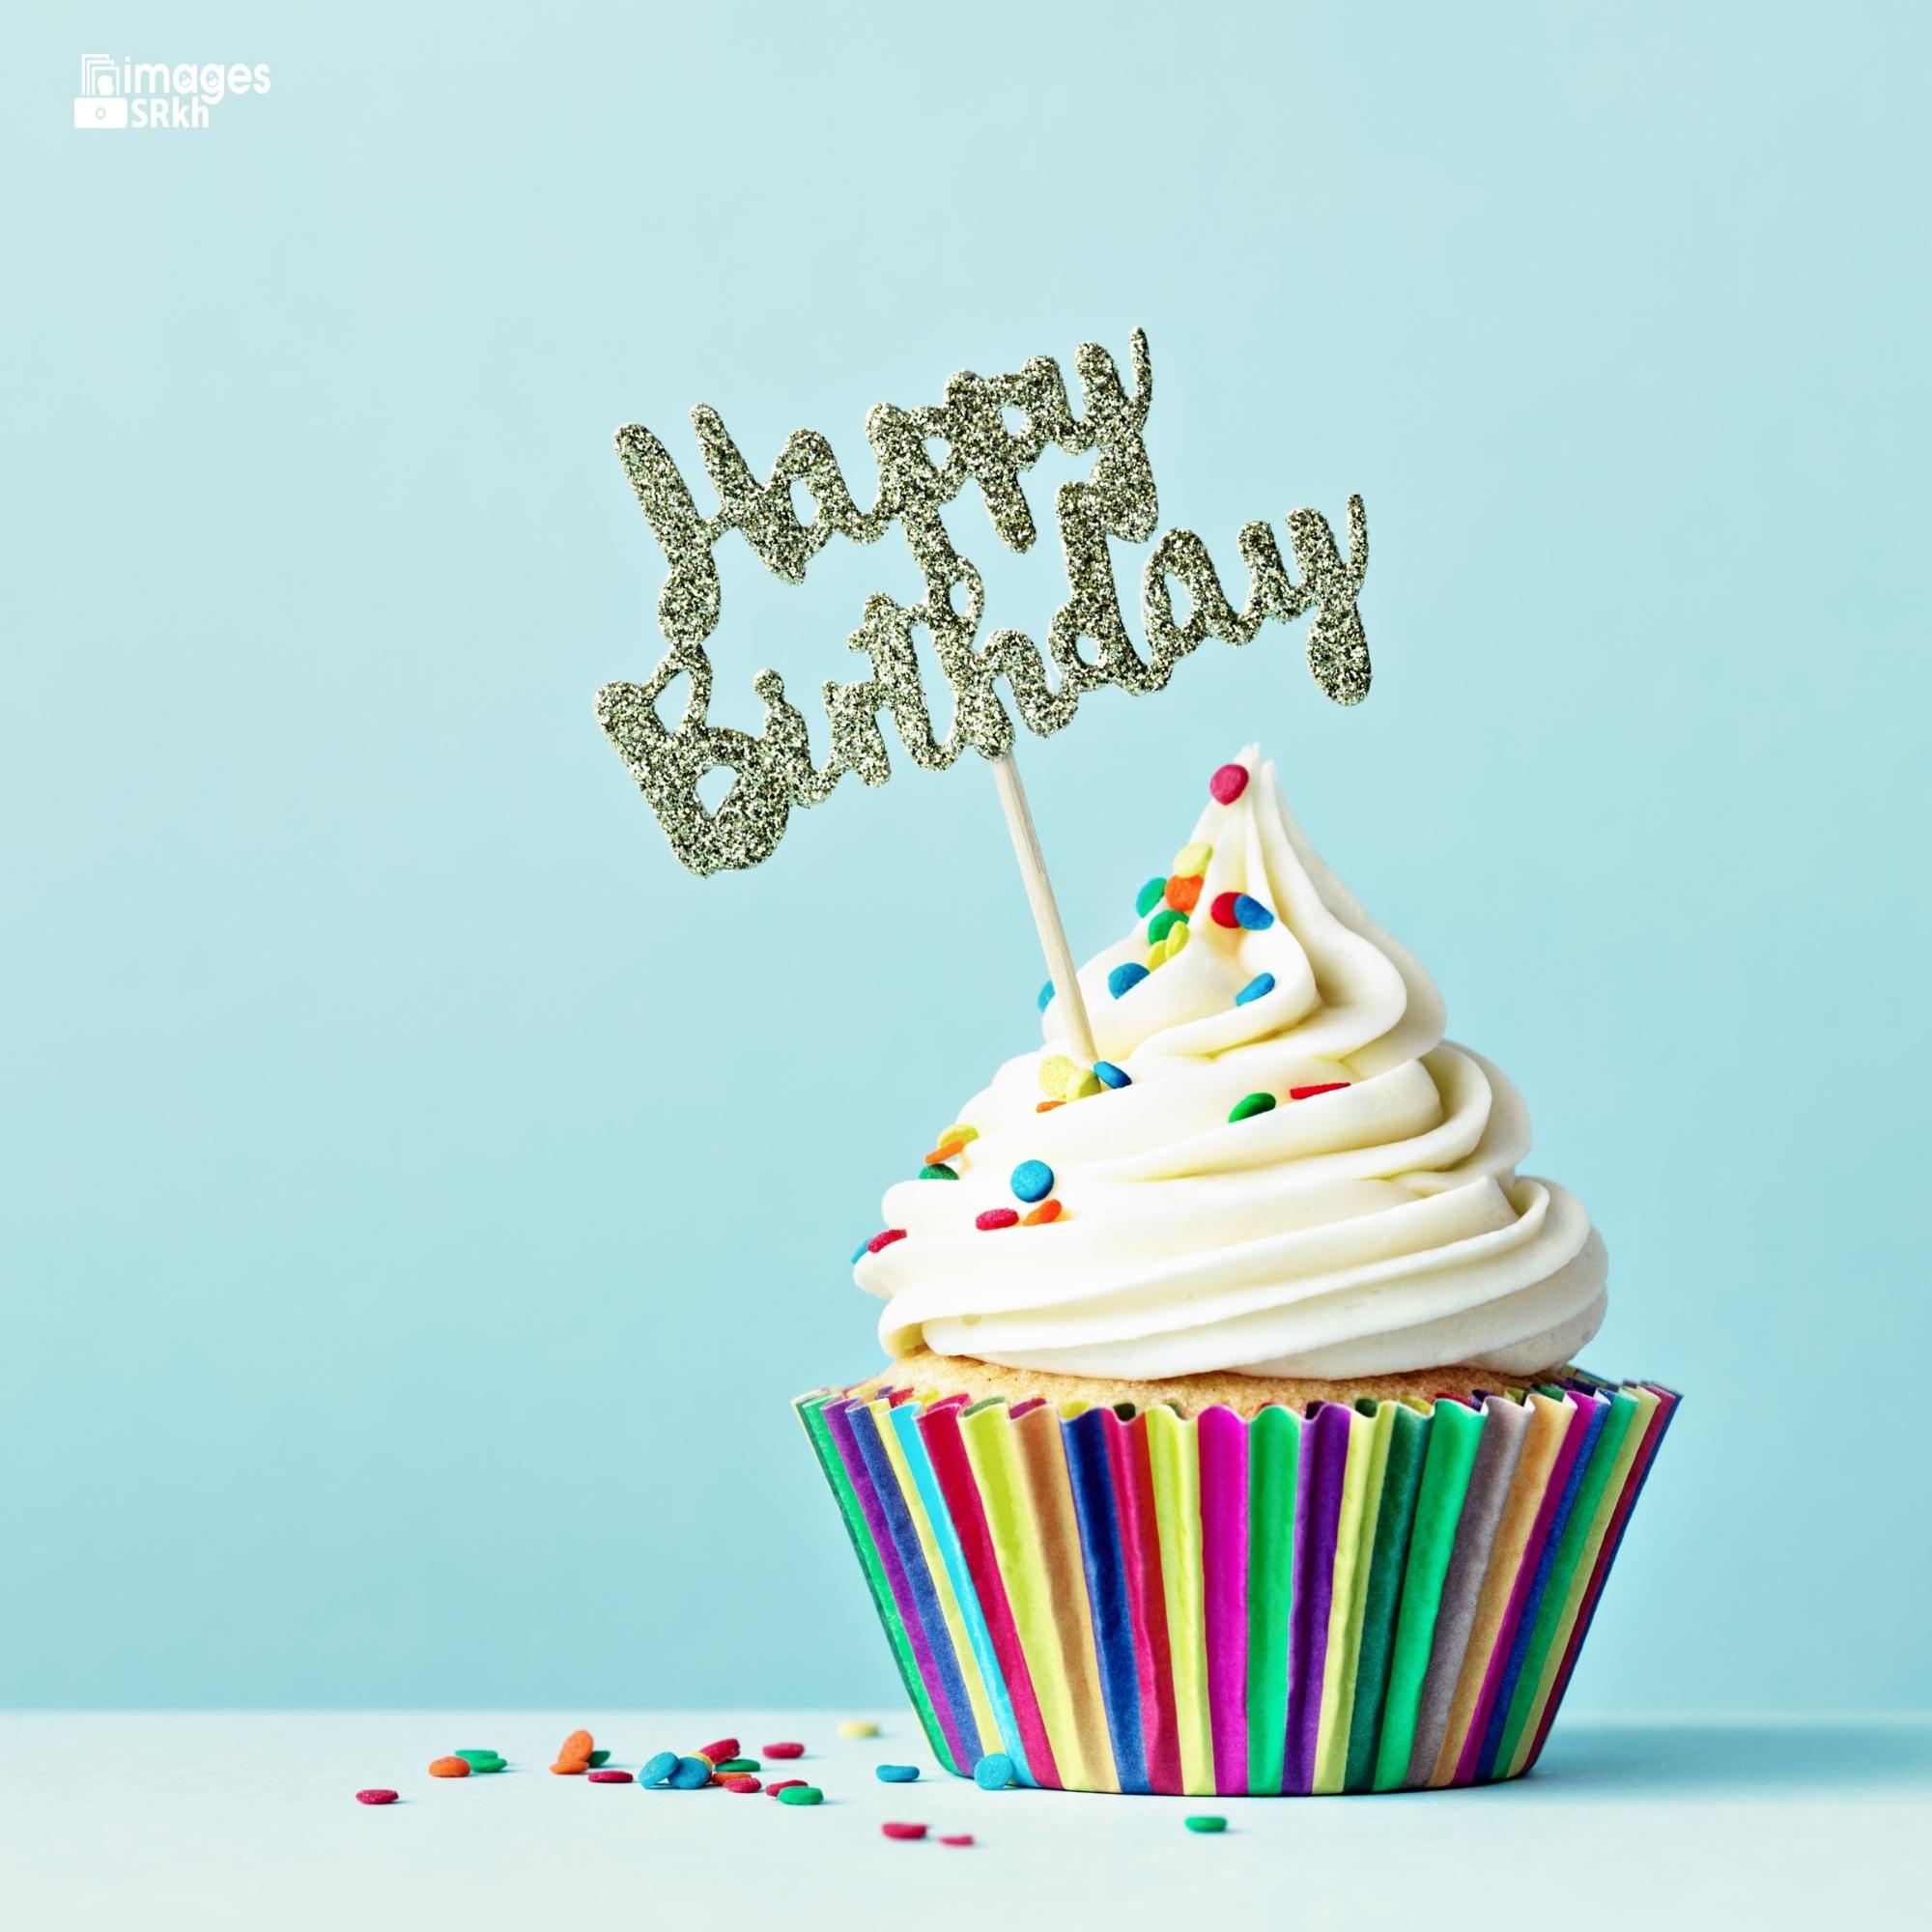 Beautiful Happy Birthday Images hd download